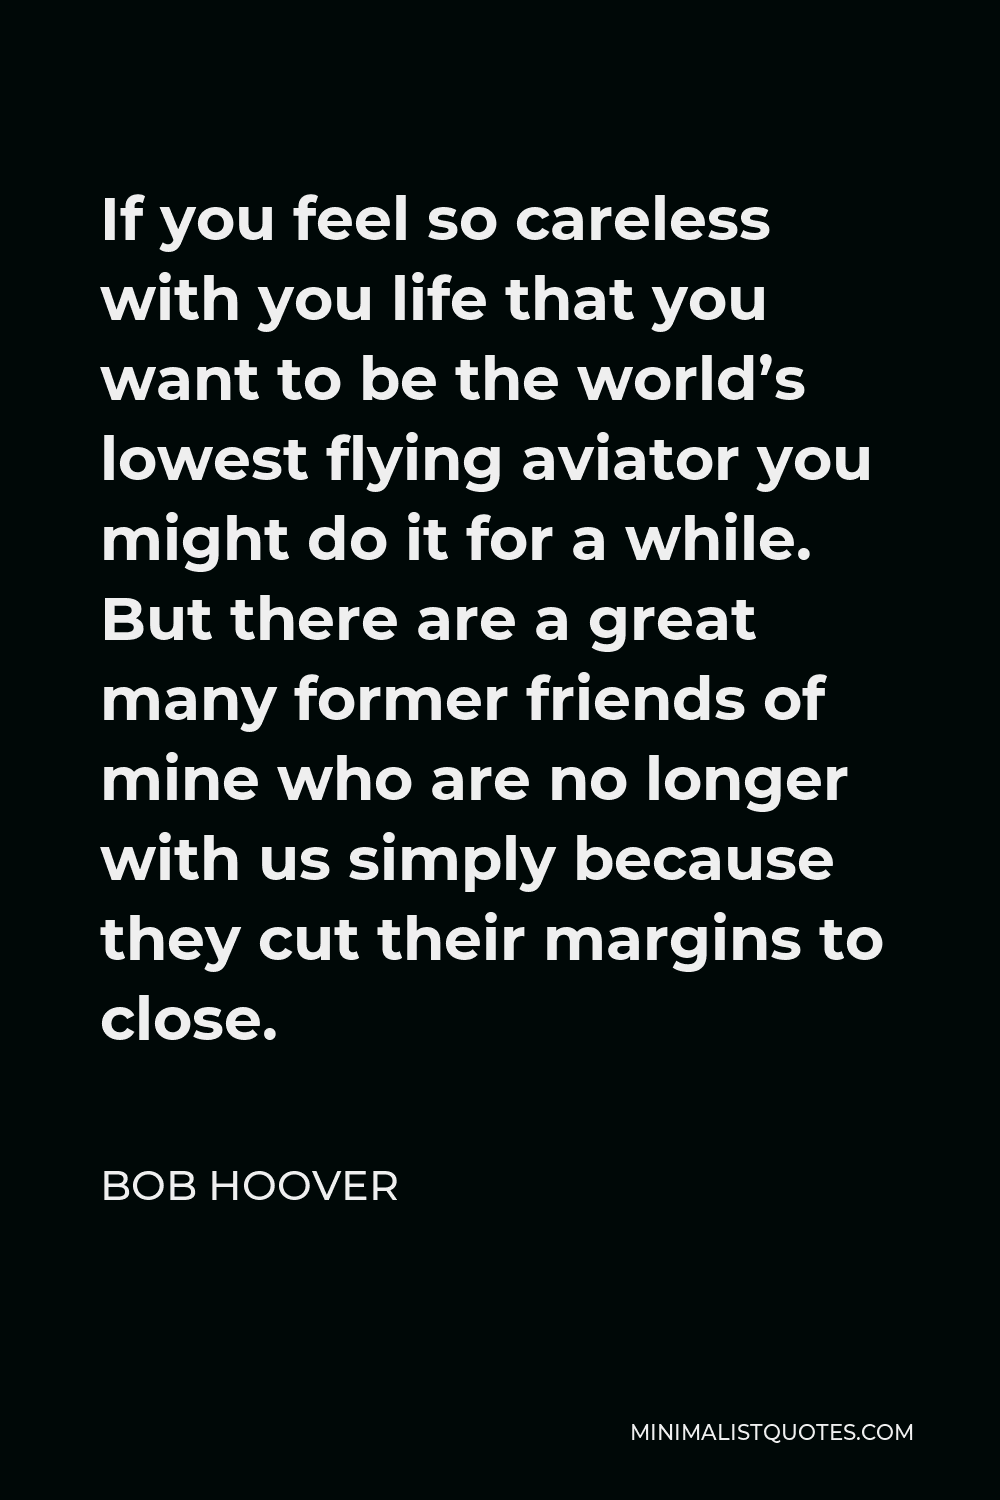 Bob Hoover Quote - If you feel so careless with you life that you want to be the world’s lowest flying aviator you might do it for a while. But there are a great many former friends of mine who are no longer with us simply because they cut their margins to close.